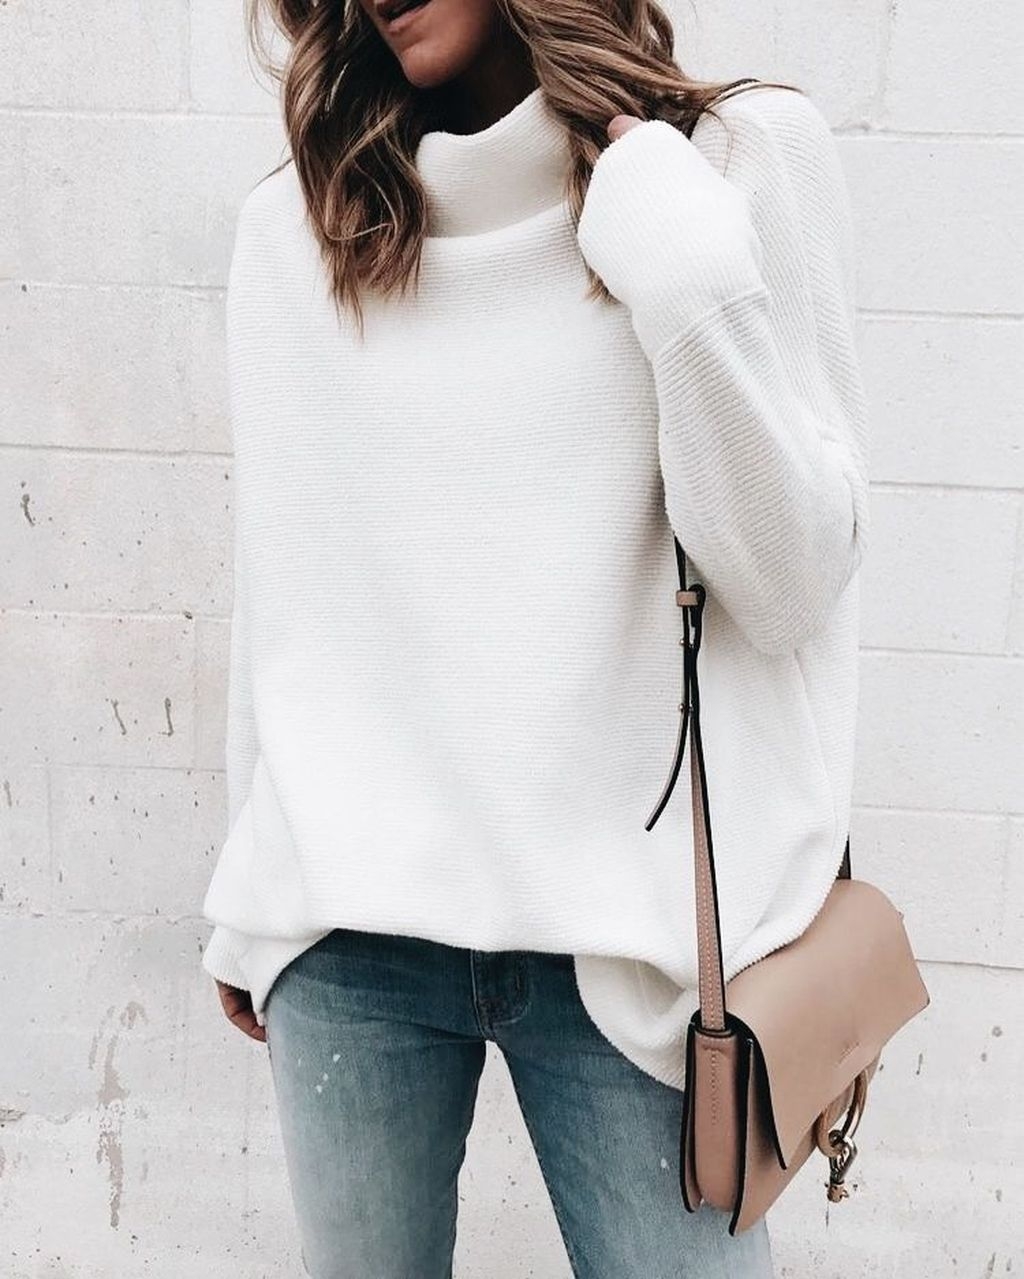 43 Perfect Winter White Dresses Ideas With Sleeves